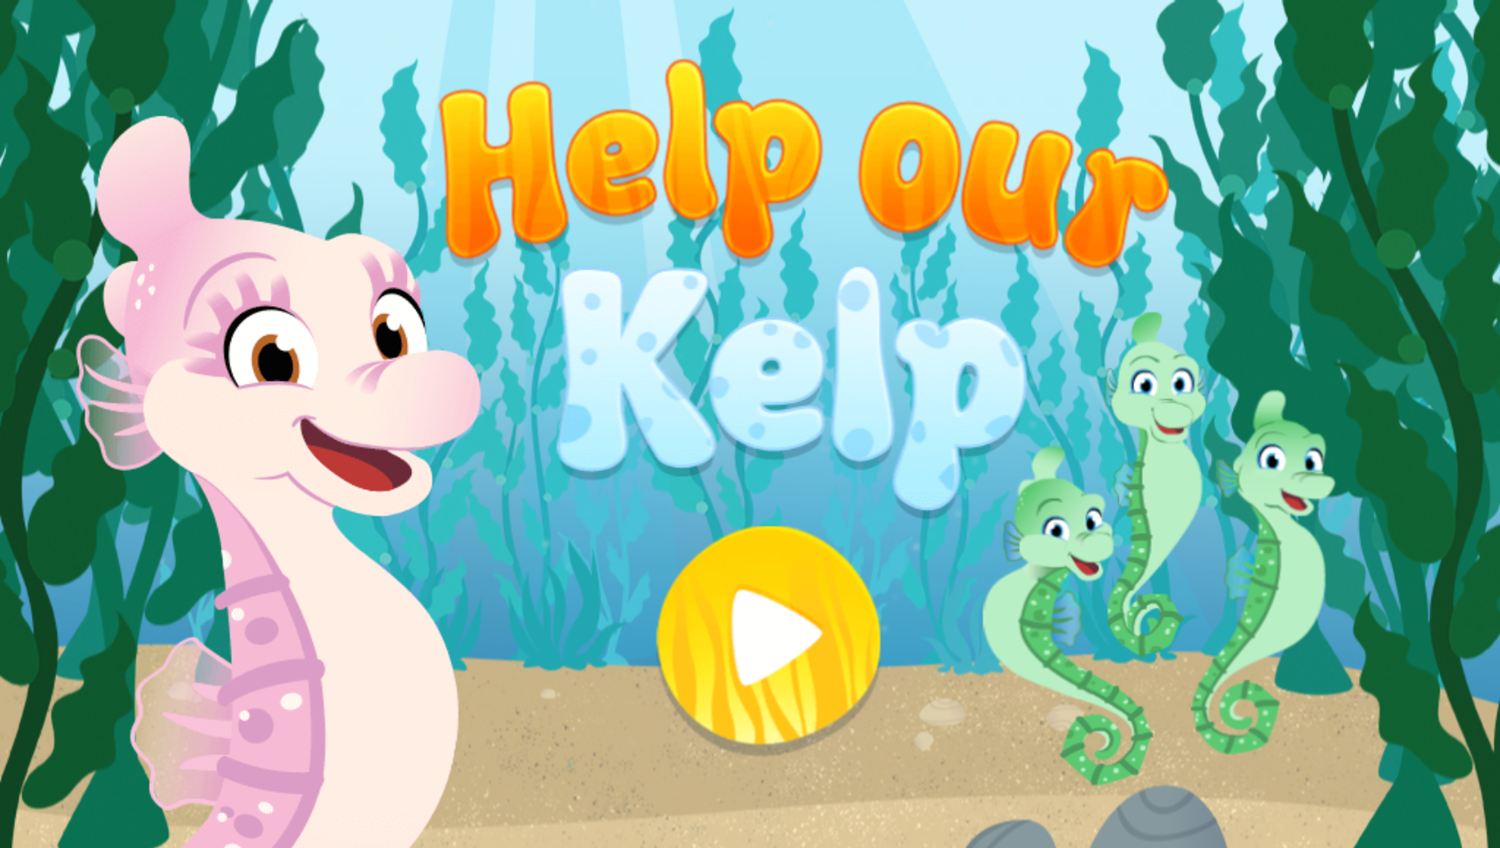 Splash and Bubbles Help Our Kelp Game Welcome Screen Screenshot.